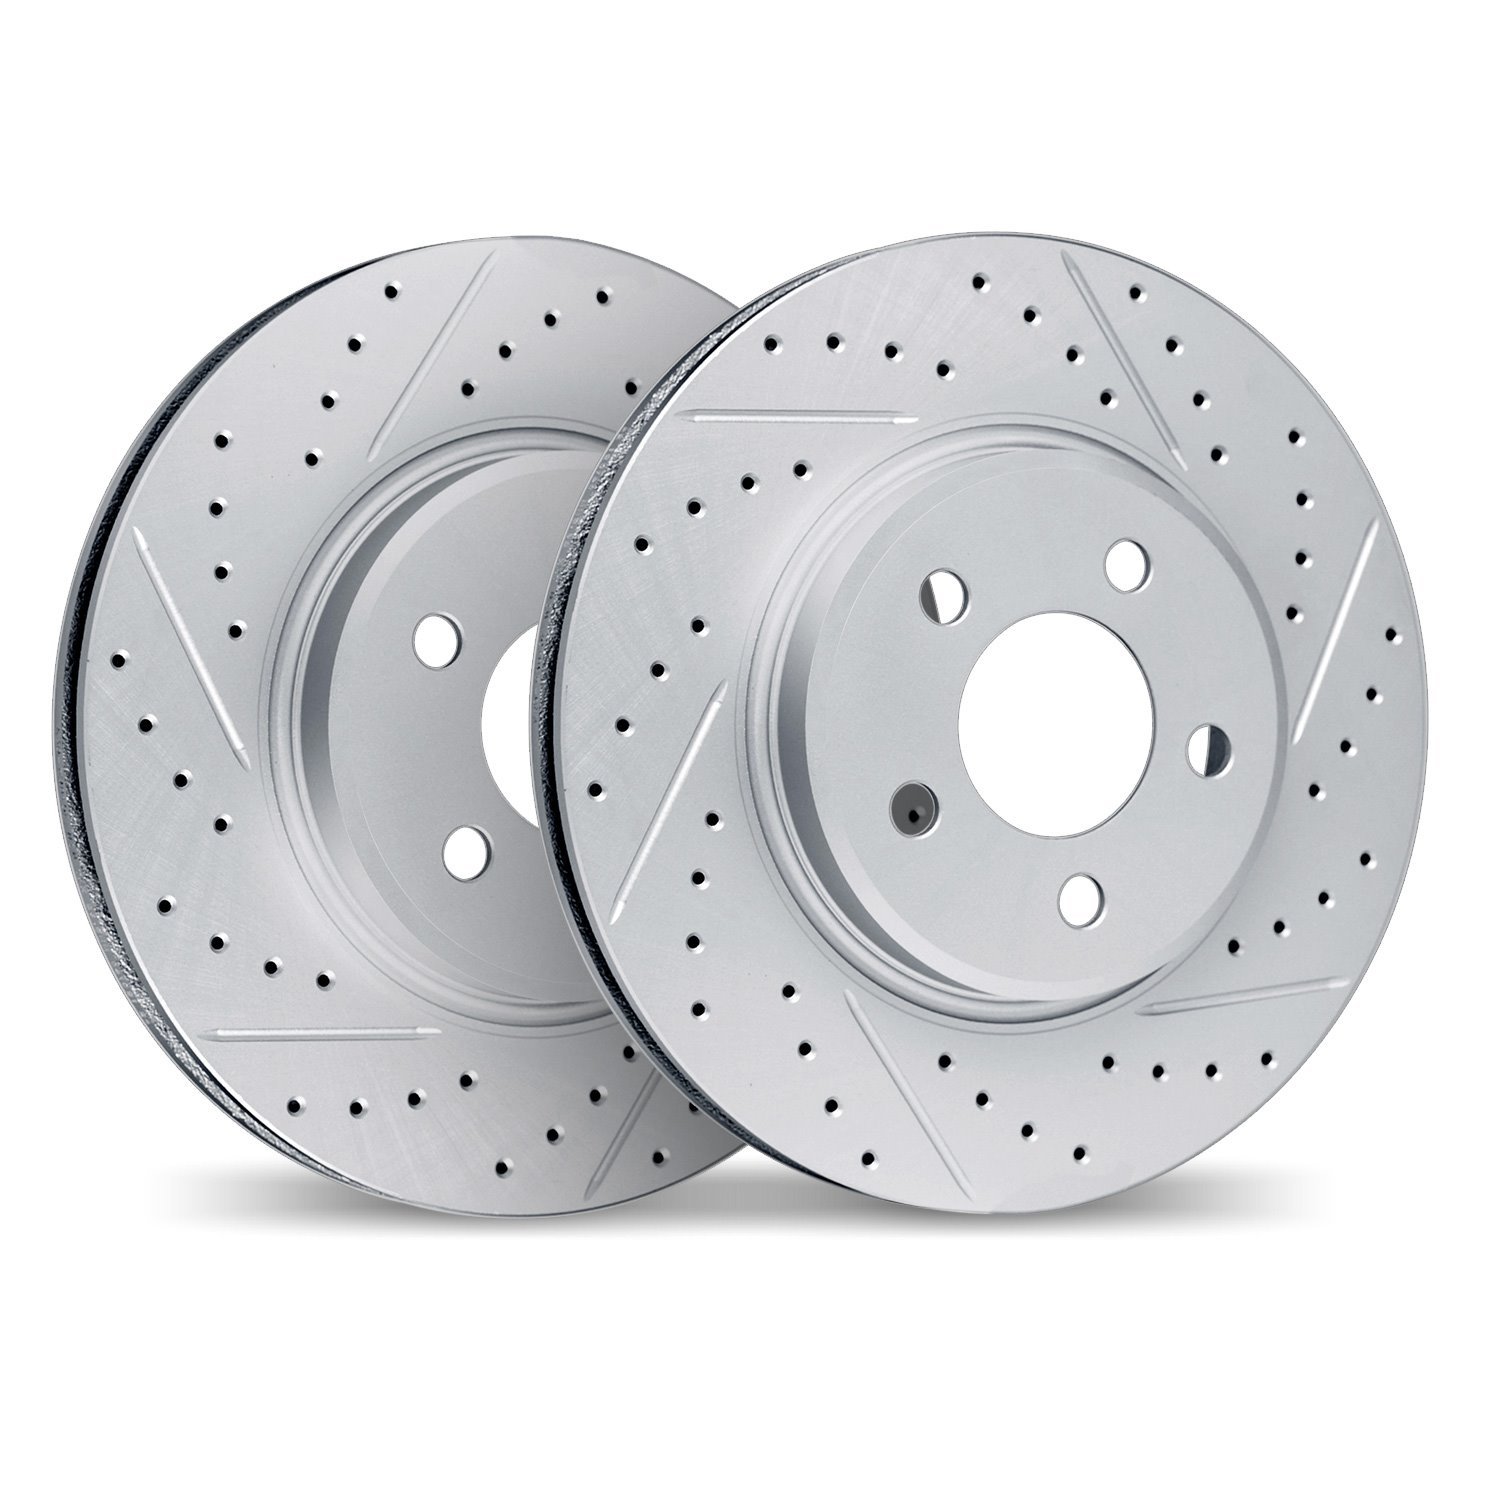 2002-13006 Geoperformance Drilled/Slotted Brake Rotors, Fits Select Subaru, Position: Front